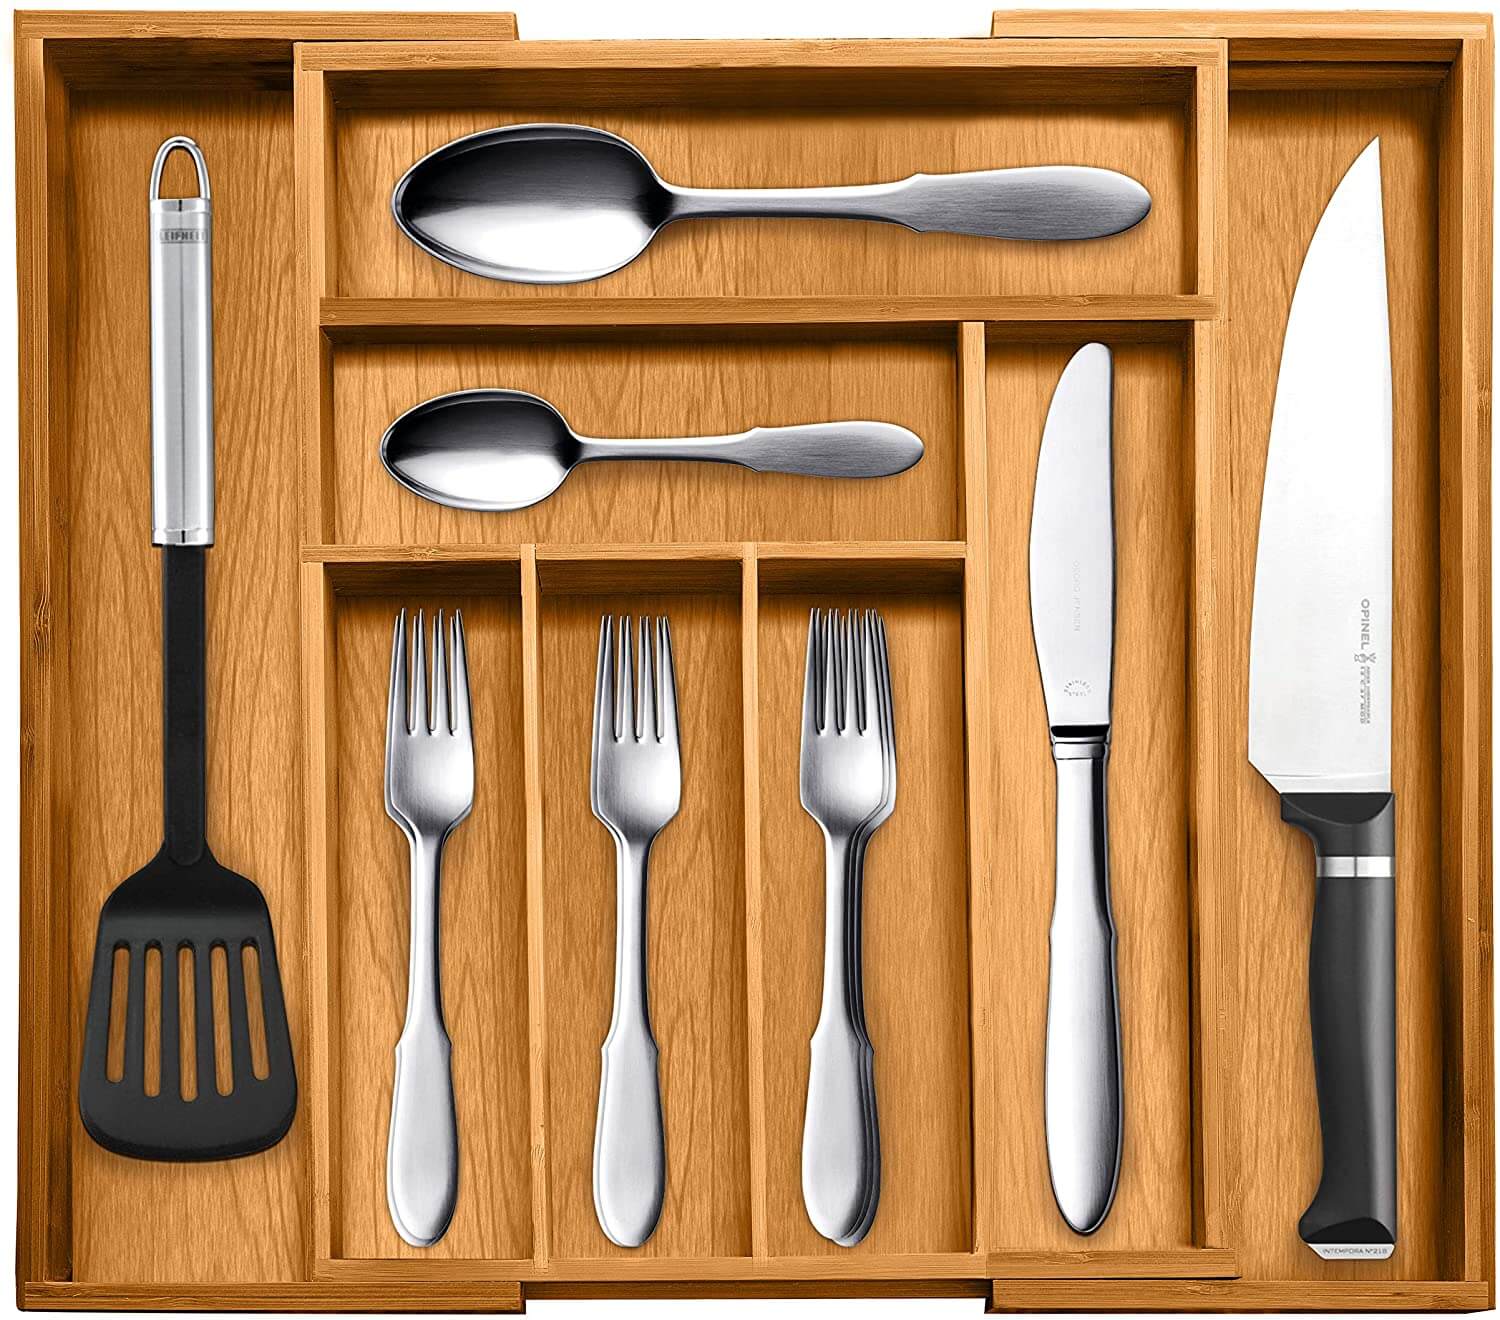 Bellemain Bamboo Expandable Cutlery and Utility Drawer Organizer